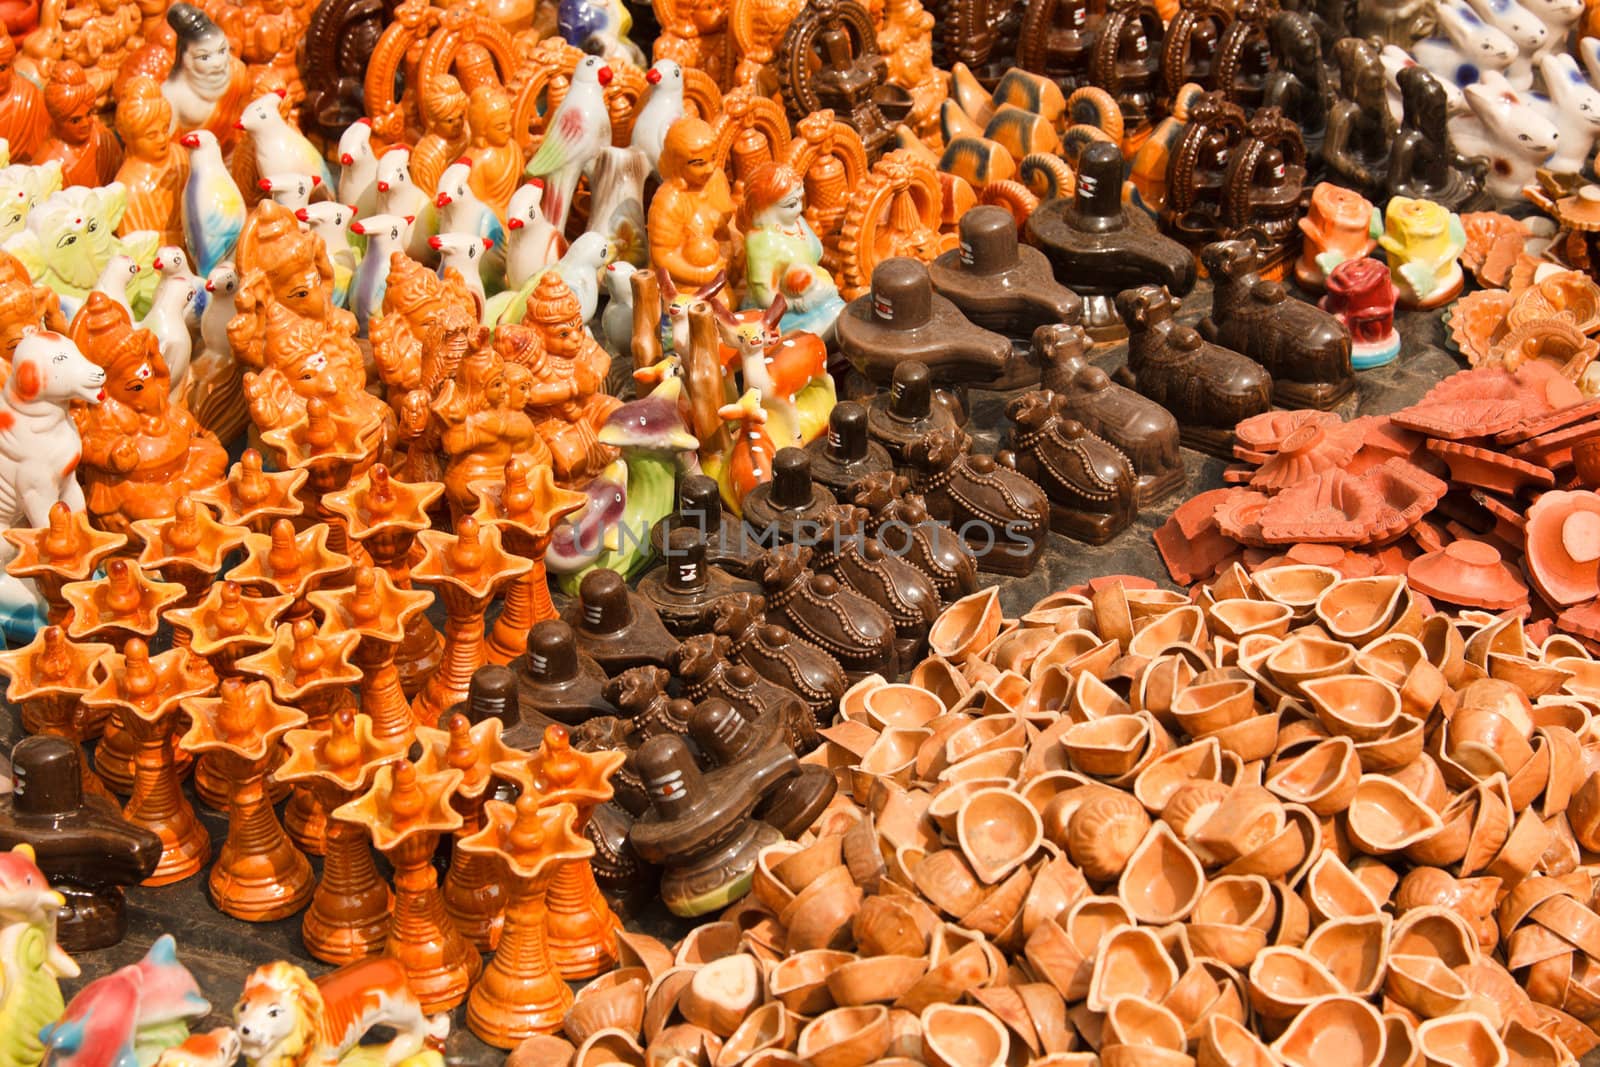 Clay toys and accessories for pooja (temple worship). Tiruvannam by dimol